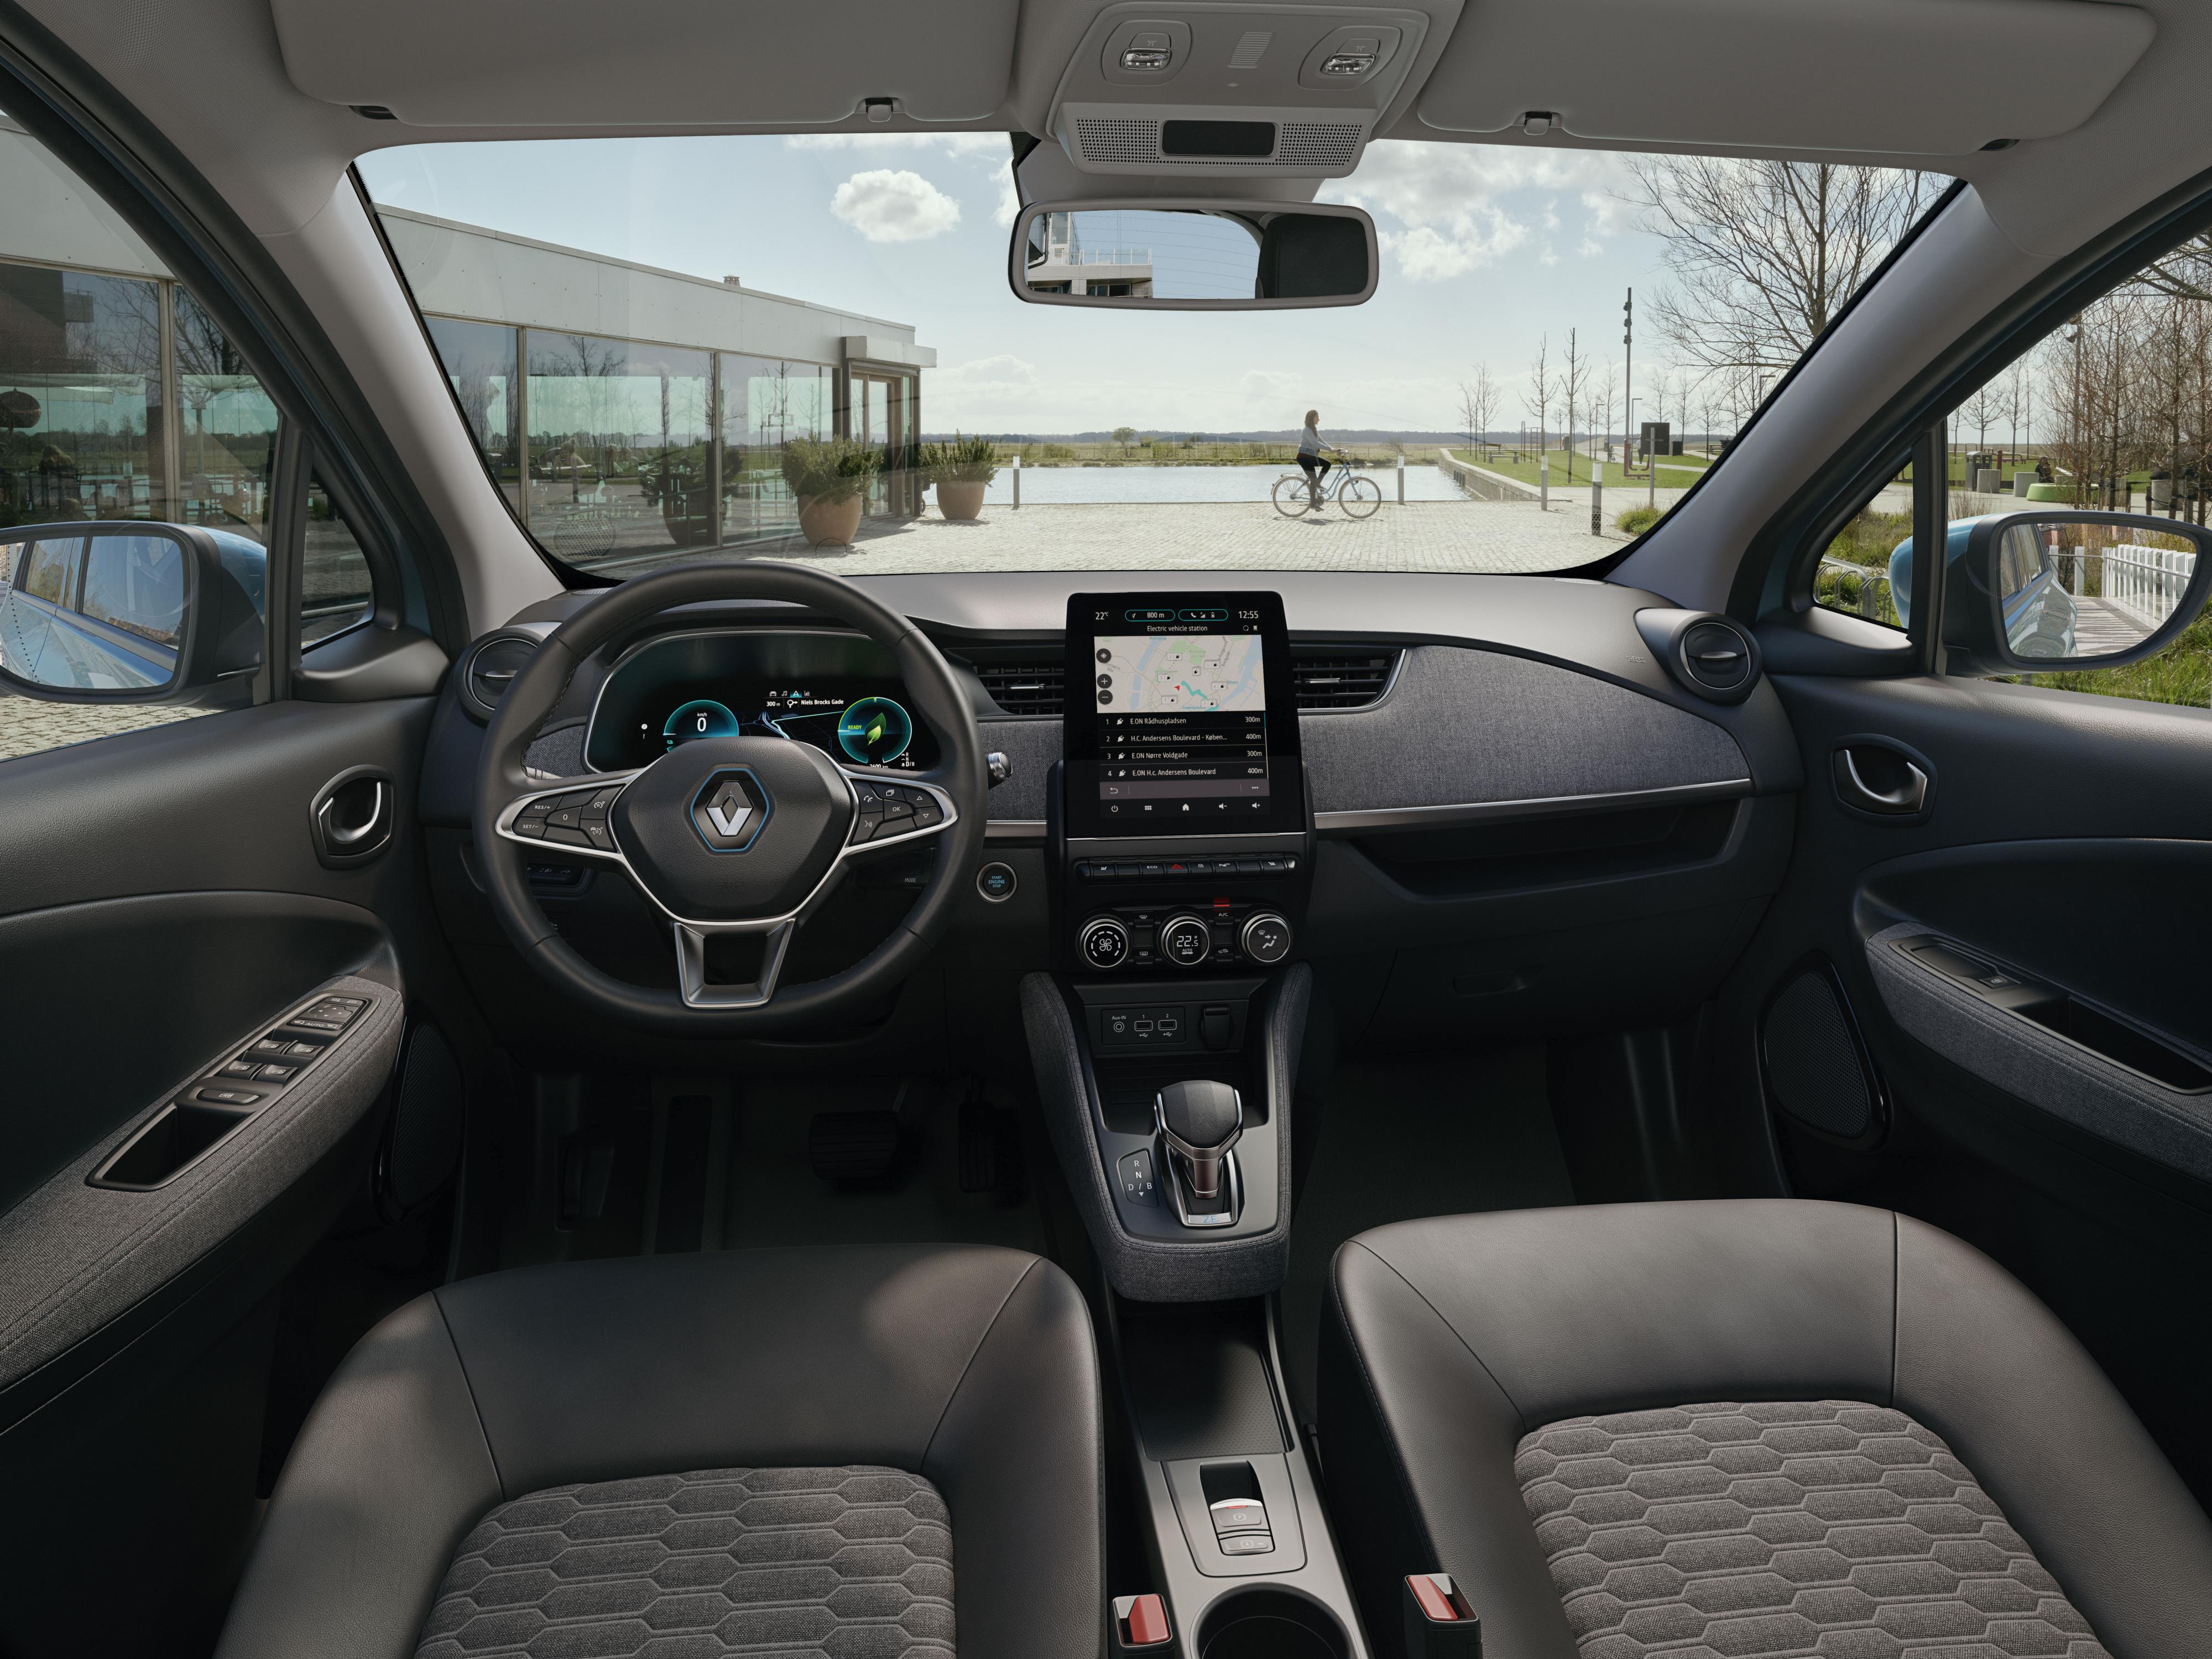 The Zoe's interior has been given a significant revamp